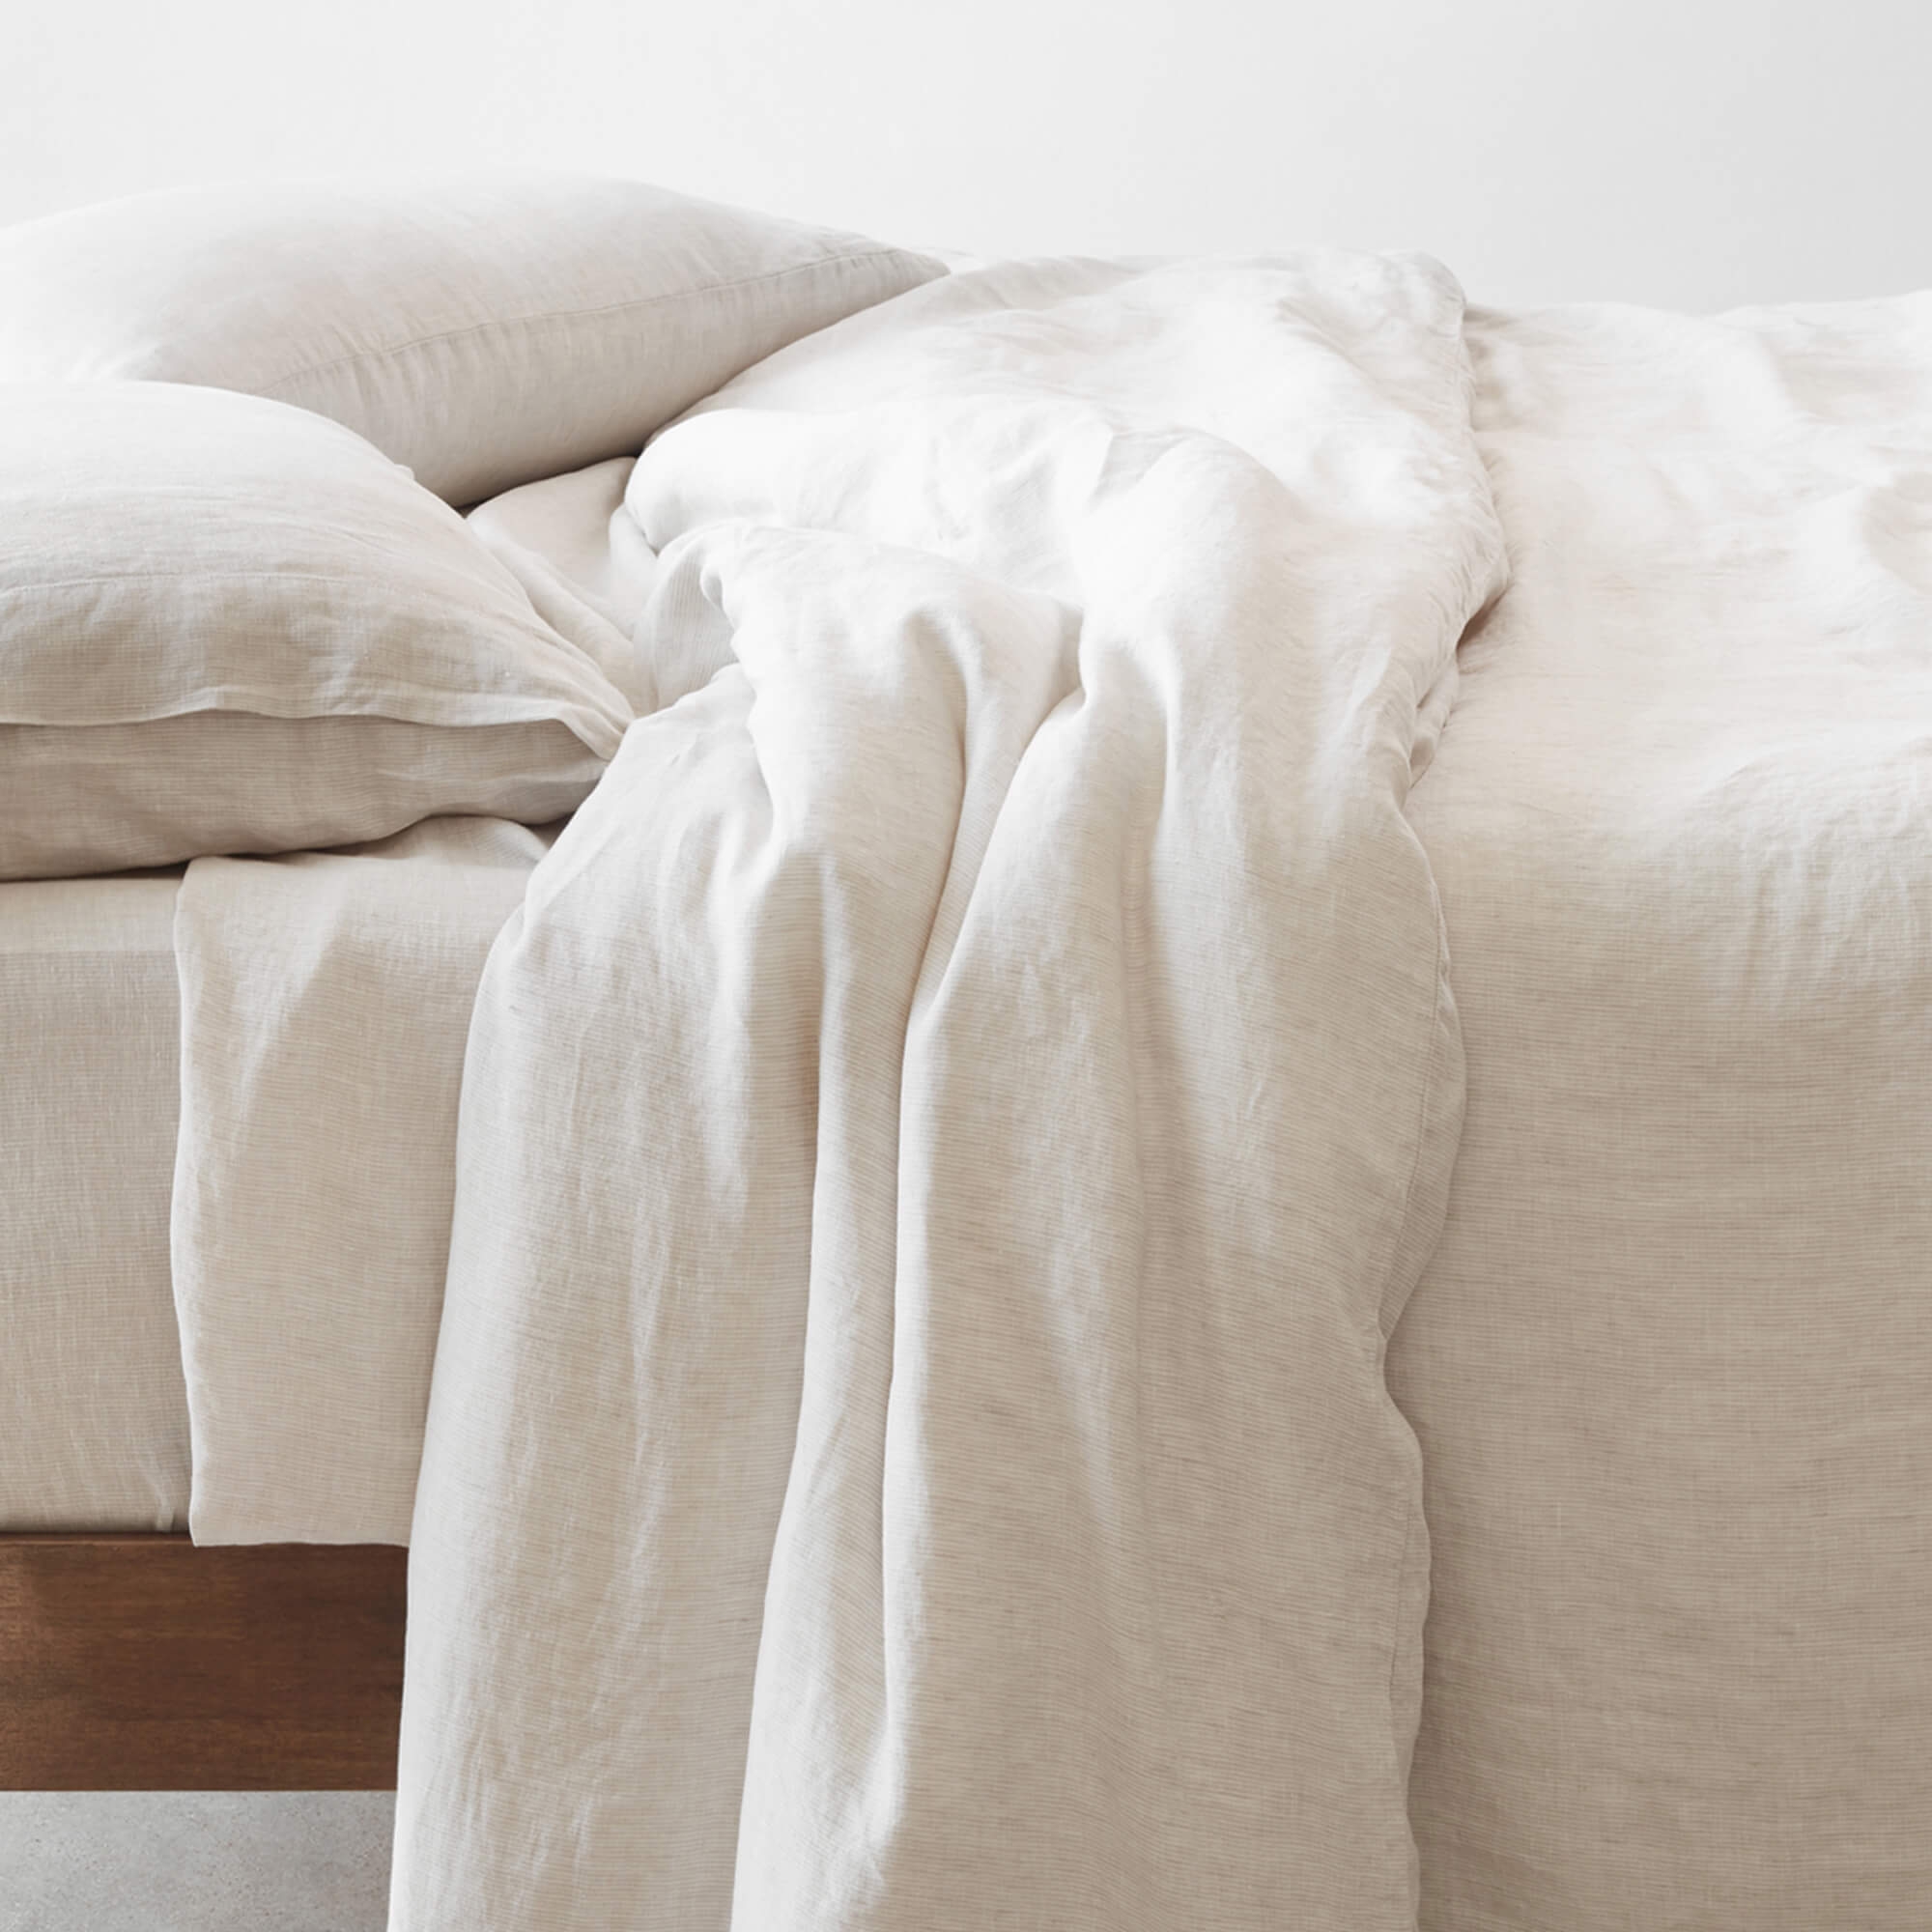 The Citizenry Stonewashed Linen Duvet Cover | Full/Queen | Duvet Only | Sienna - Image 7